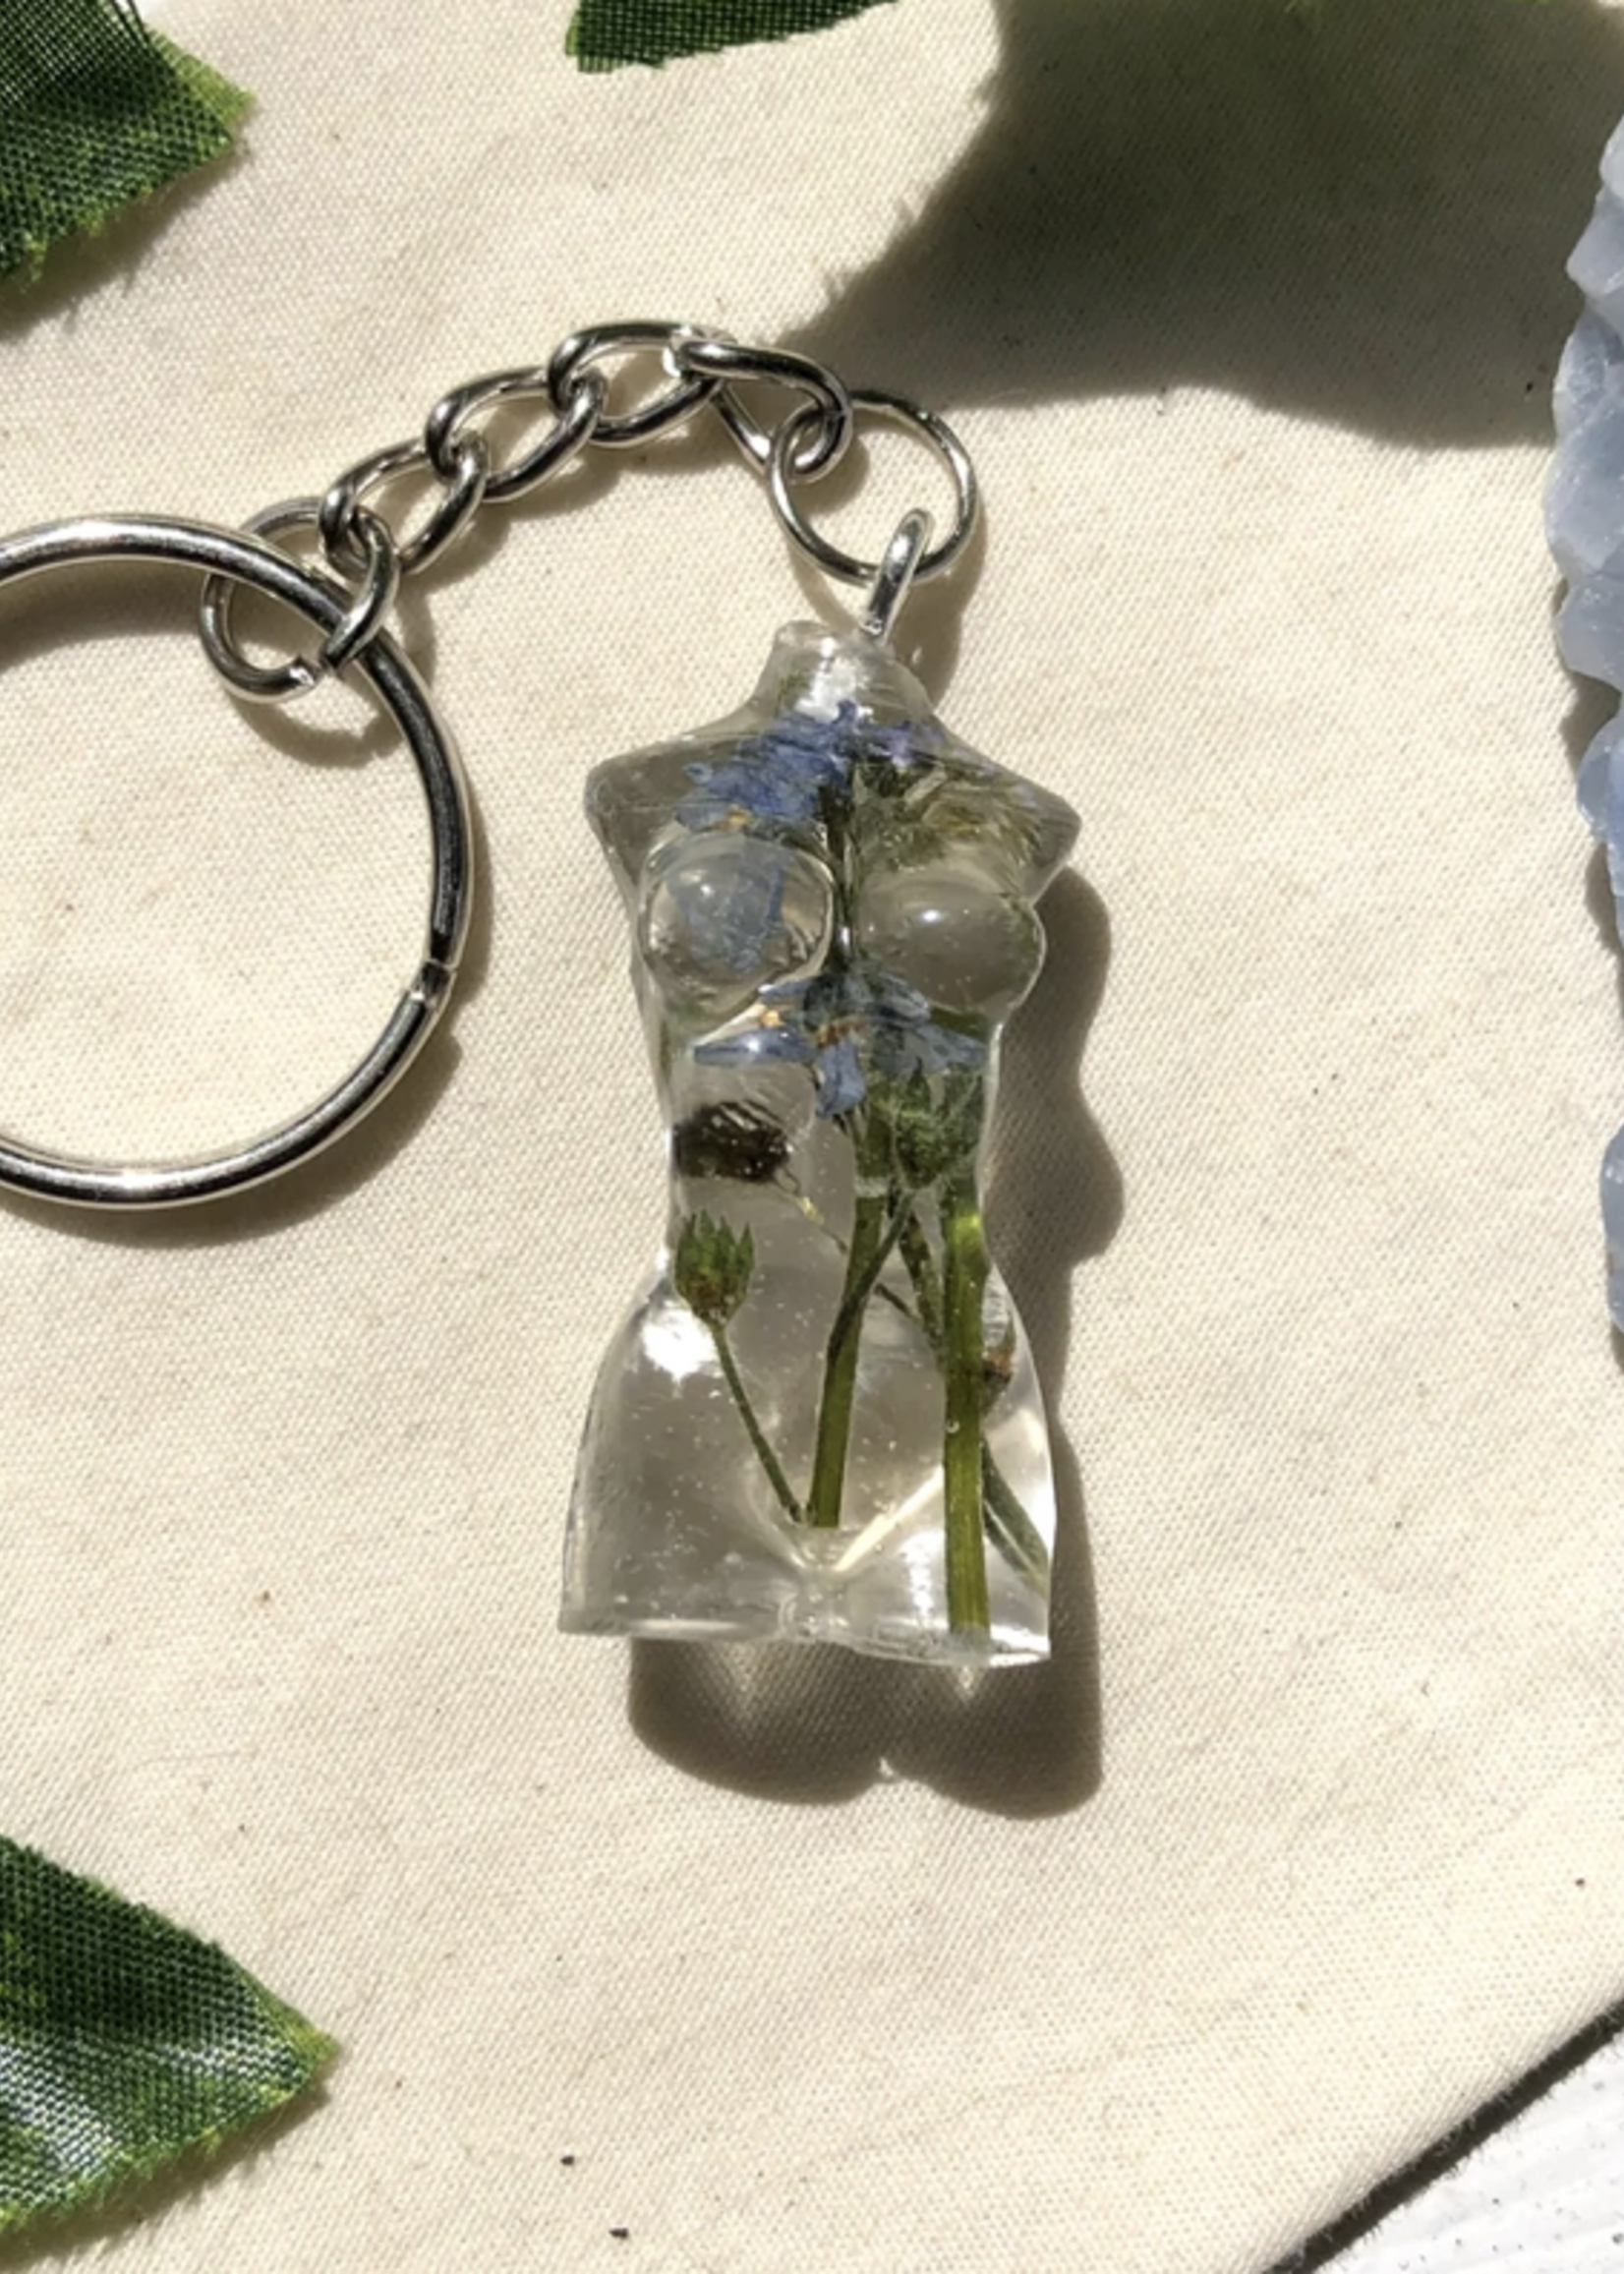 Goddess Keychains: Forget me Nots